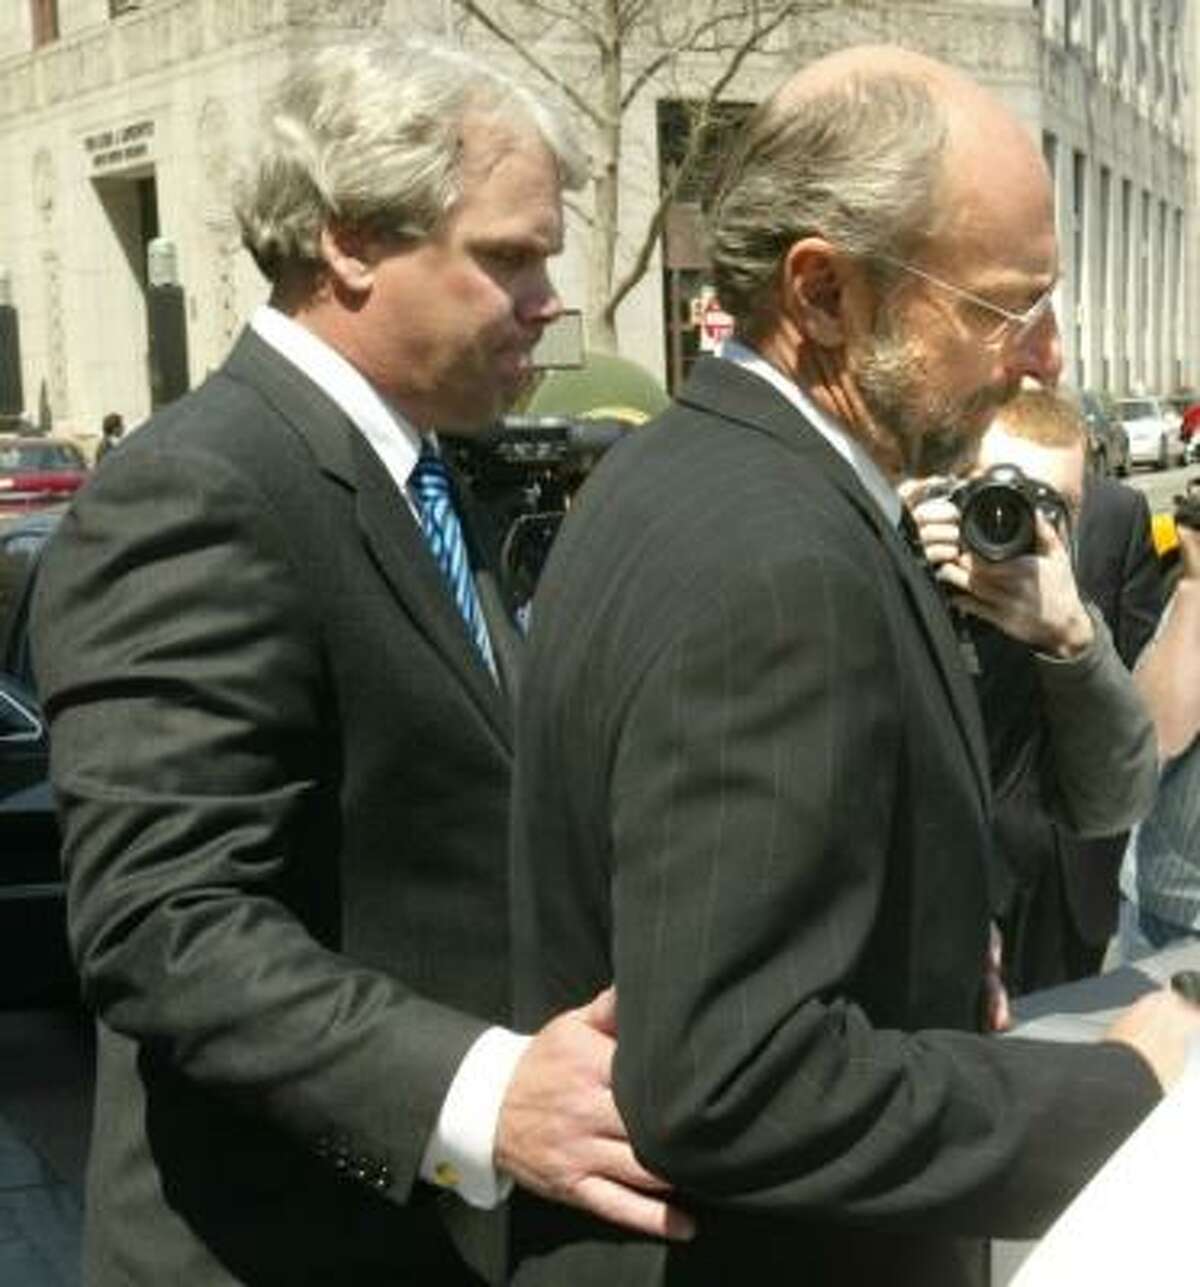 David Chalmers, right, leaves district court in New York in 2006. He could expect to serve 37 to 46 months in prison.